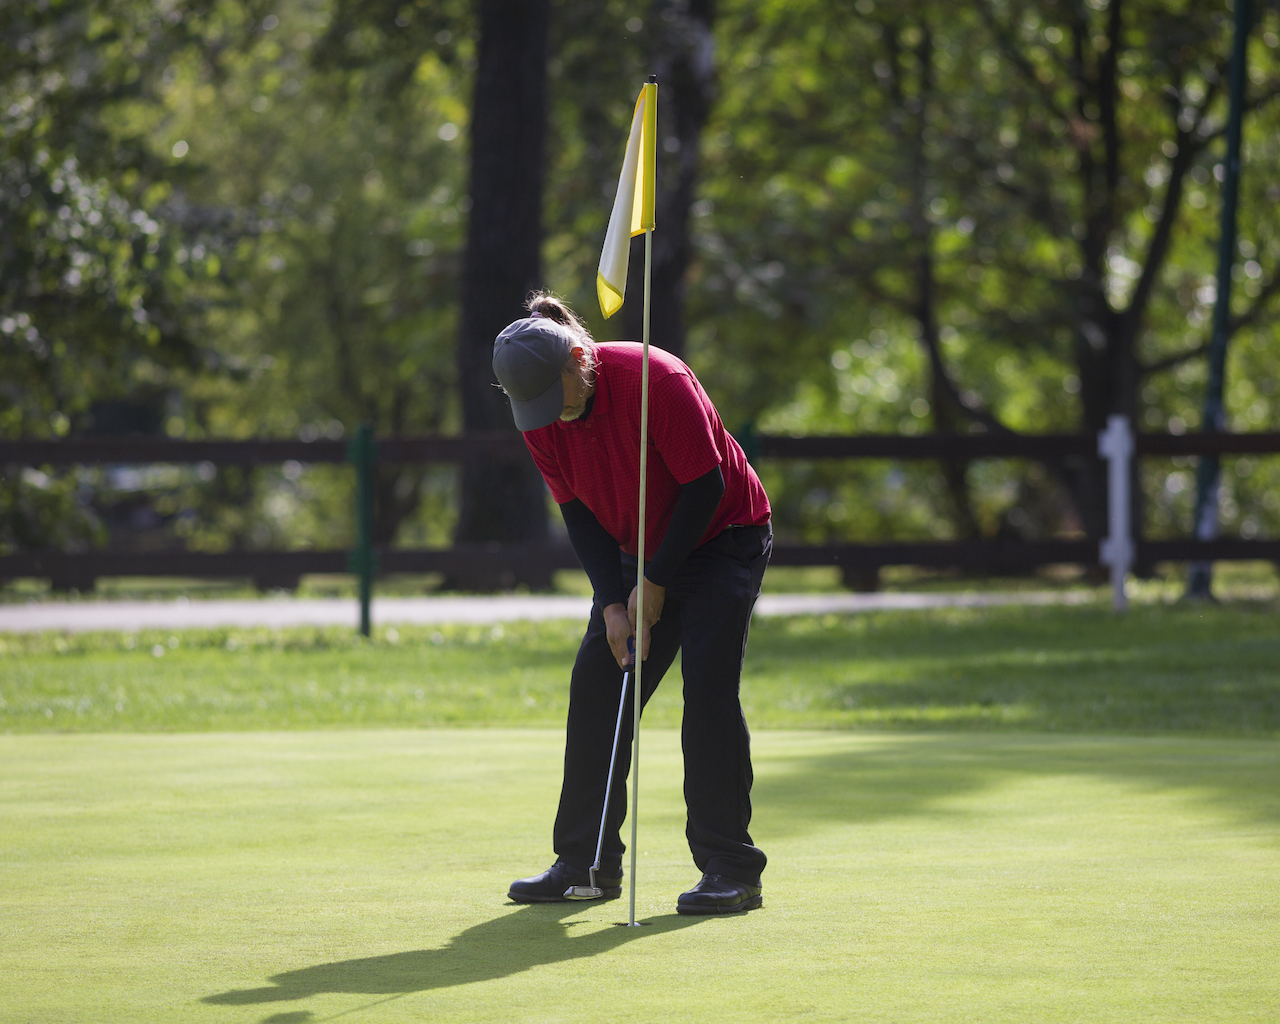 Golfer tapping in putt